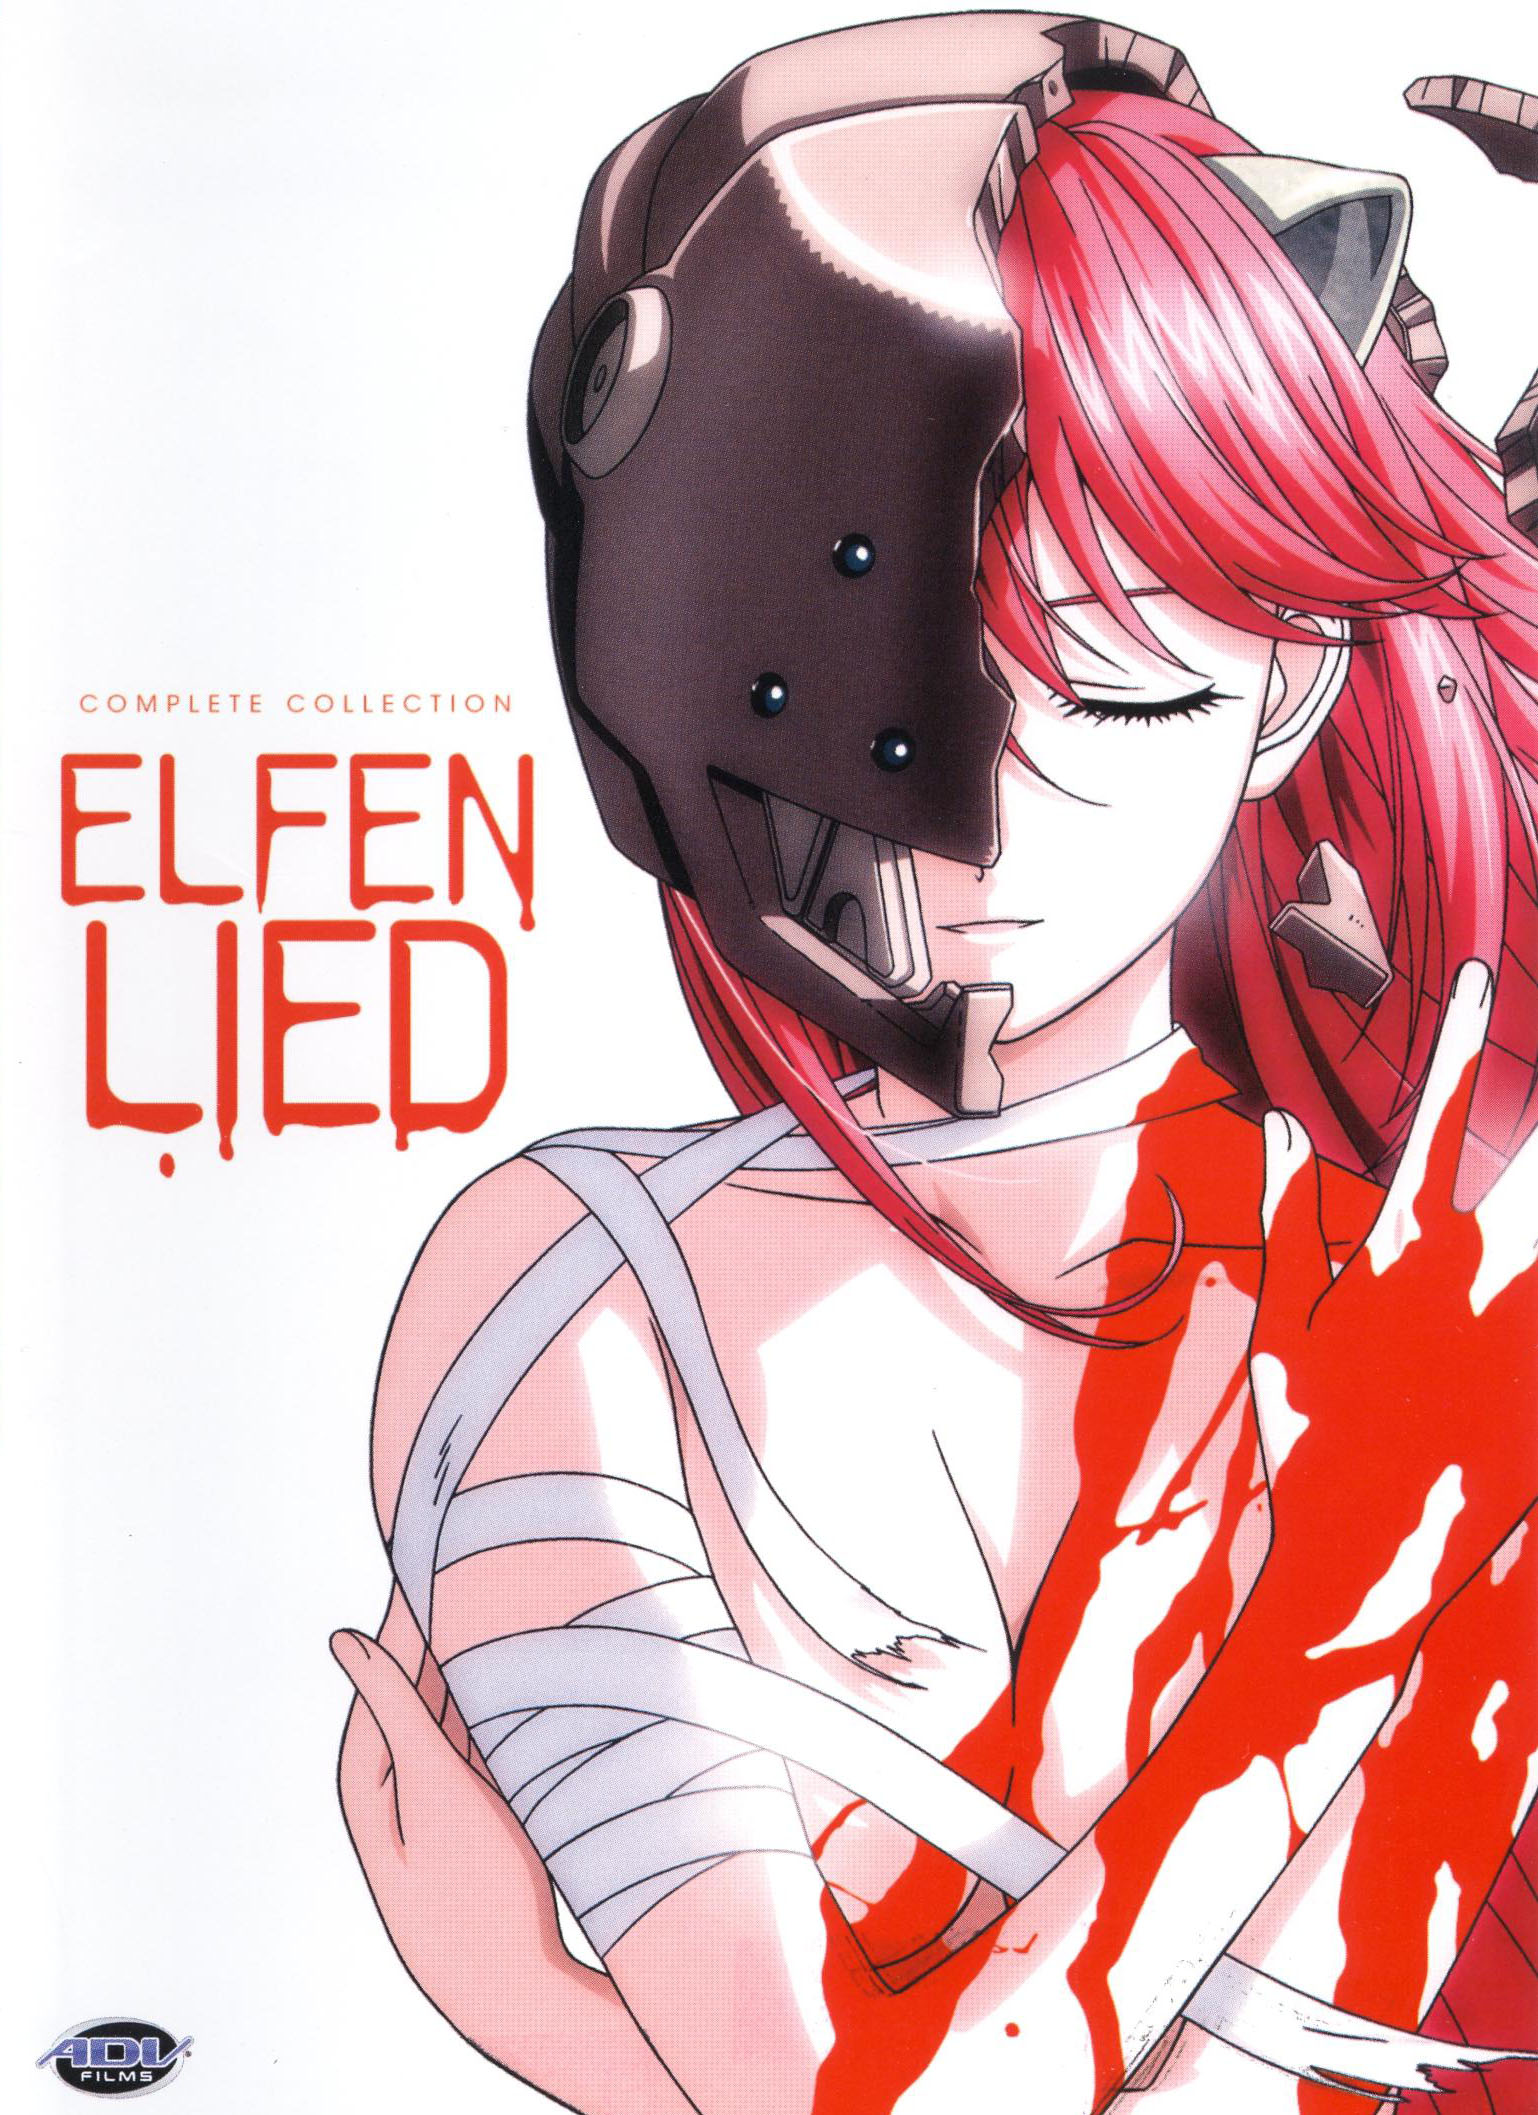 Elfen Lied: Complete Collection (DVD, 2011, 3-Disc Set) for sale